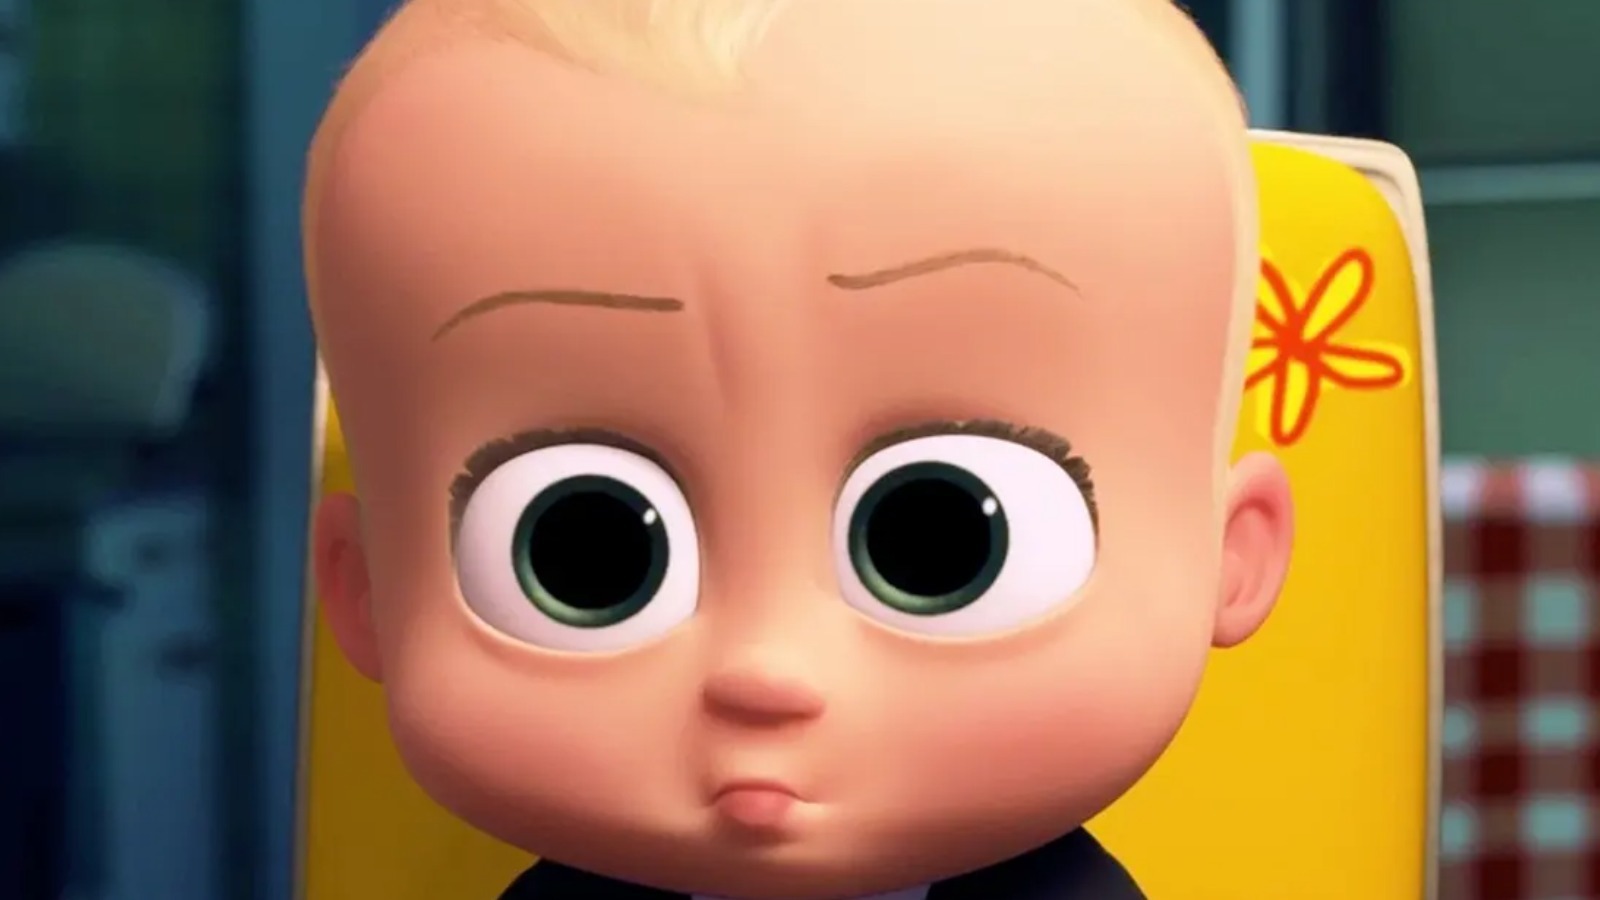 Things Only Adults Notice In The Boss Baby Franchise